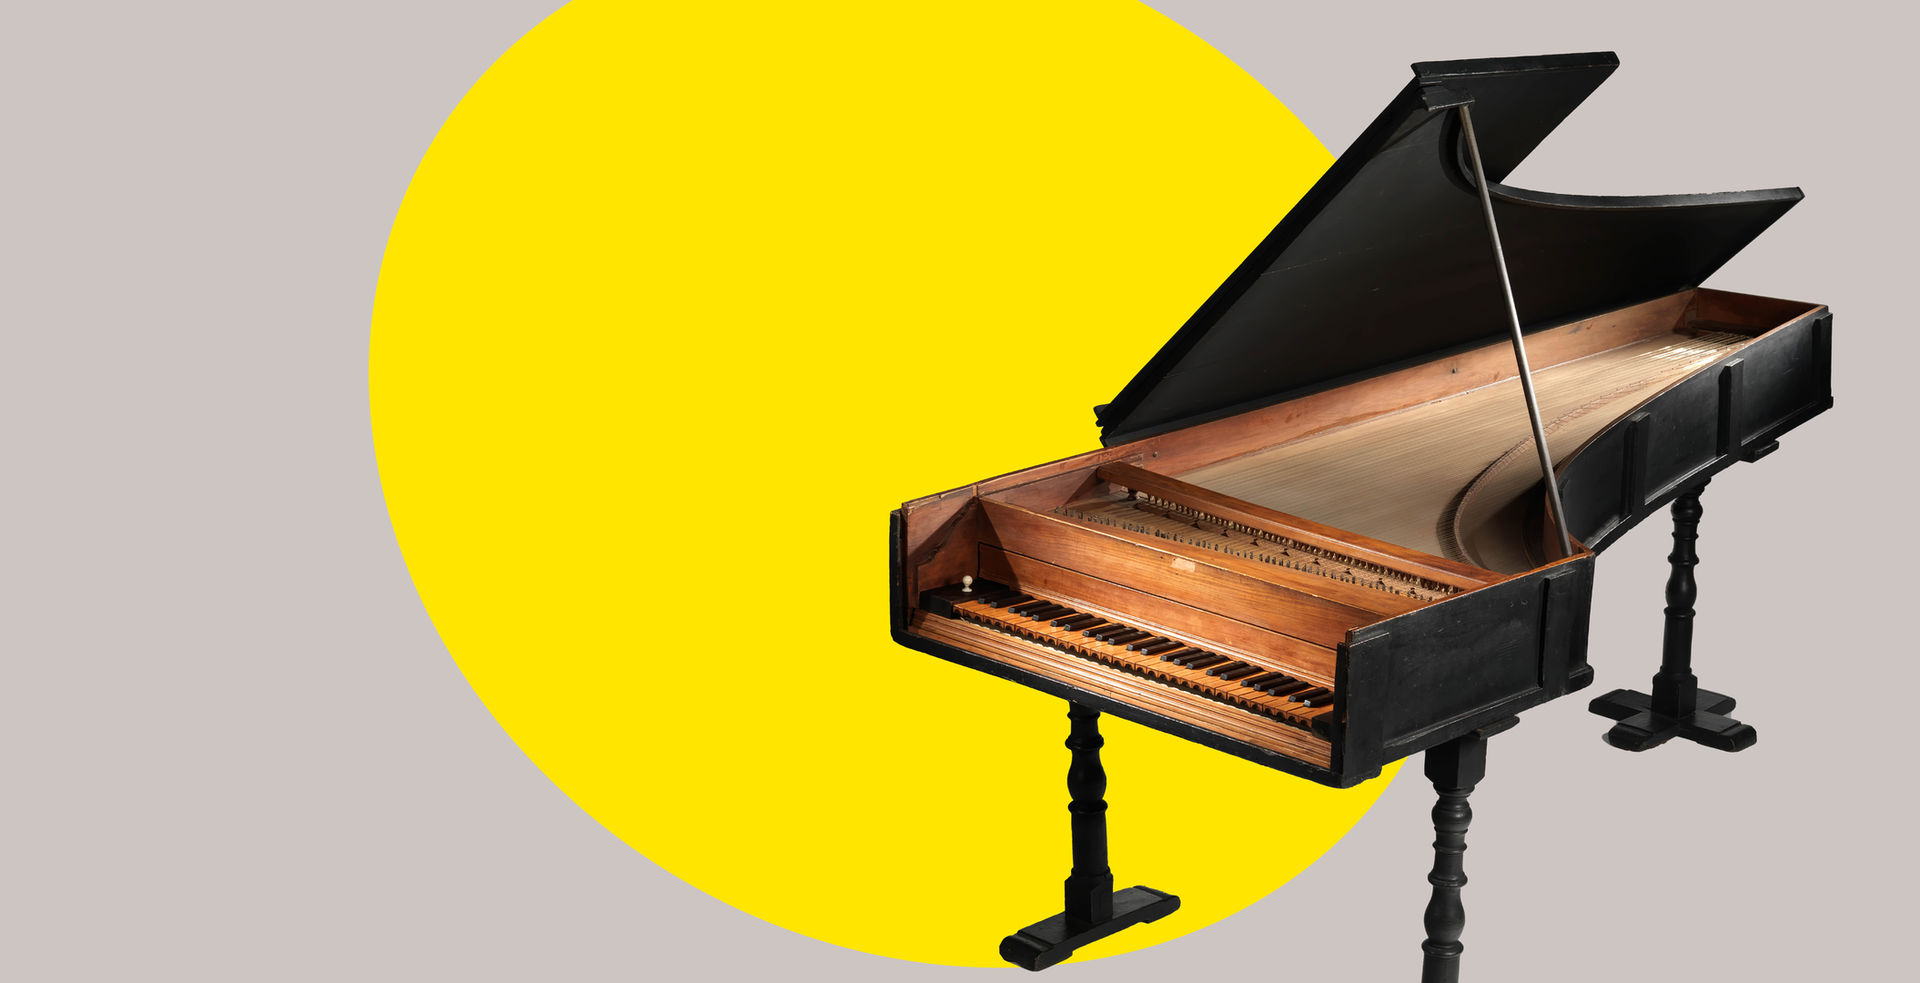 18th-century piano with a bright yellow ovular spotlight shape behind the figure in the background